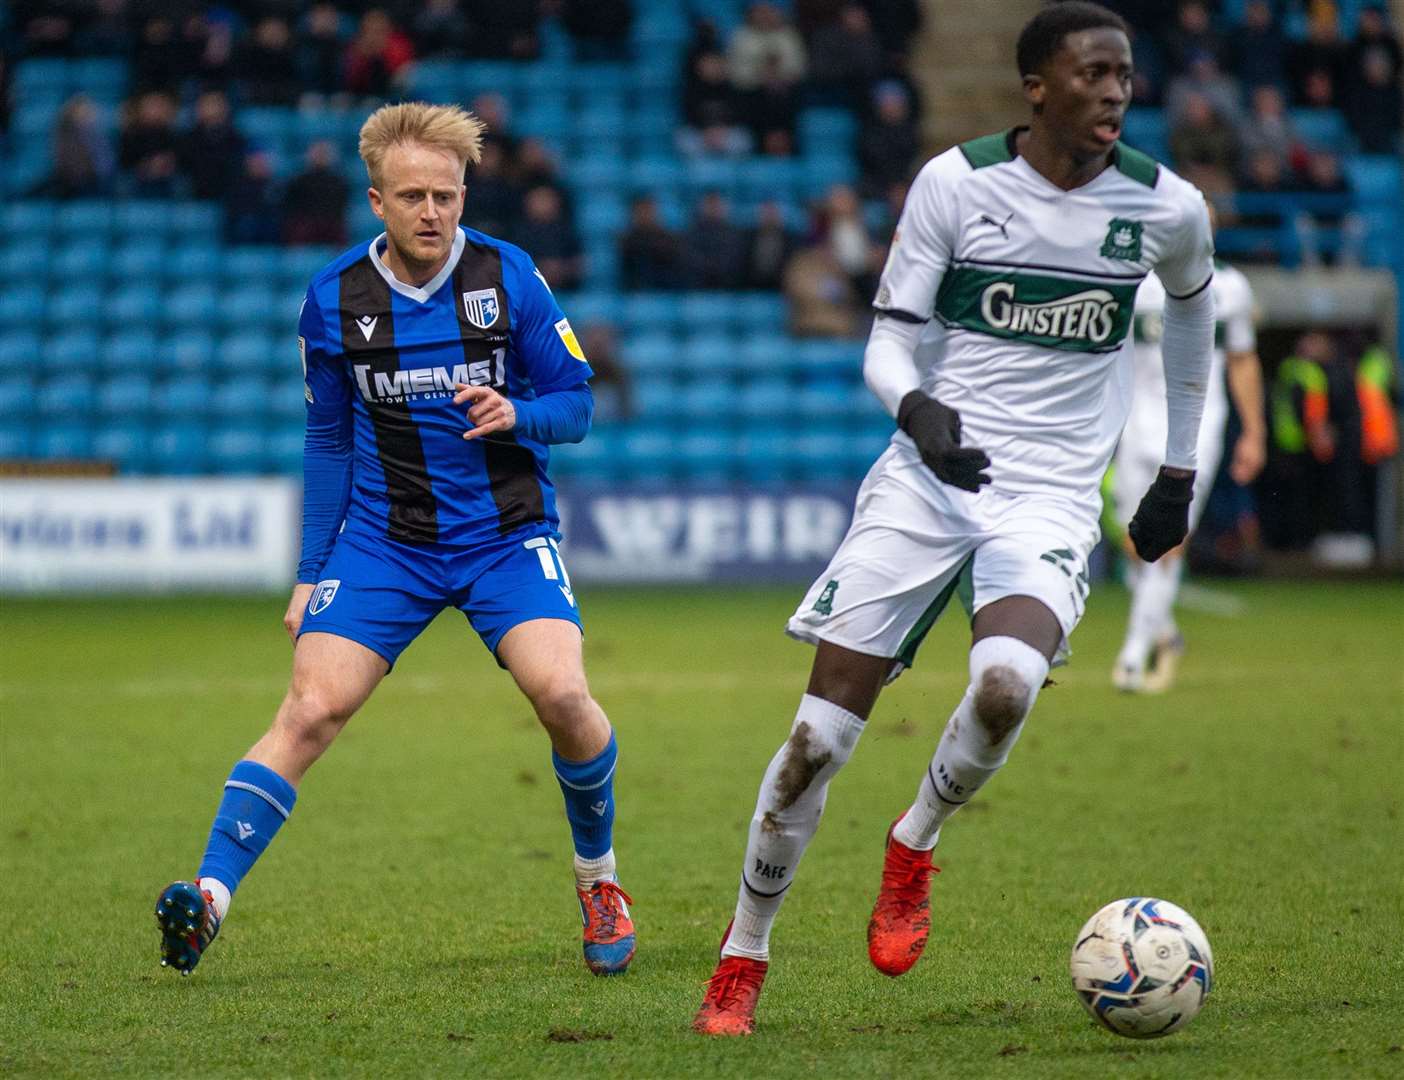 Gillingham midfielder Ben Reeves made a welcome return from injury during his side's home loss to Plymouth. Picture: KPI